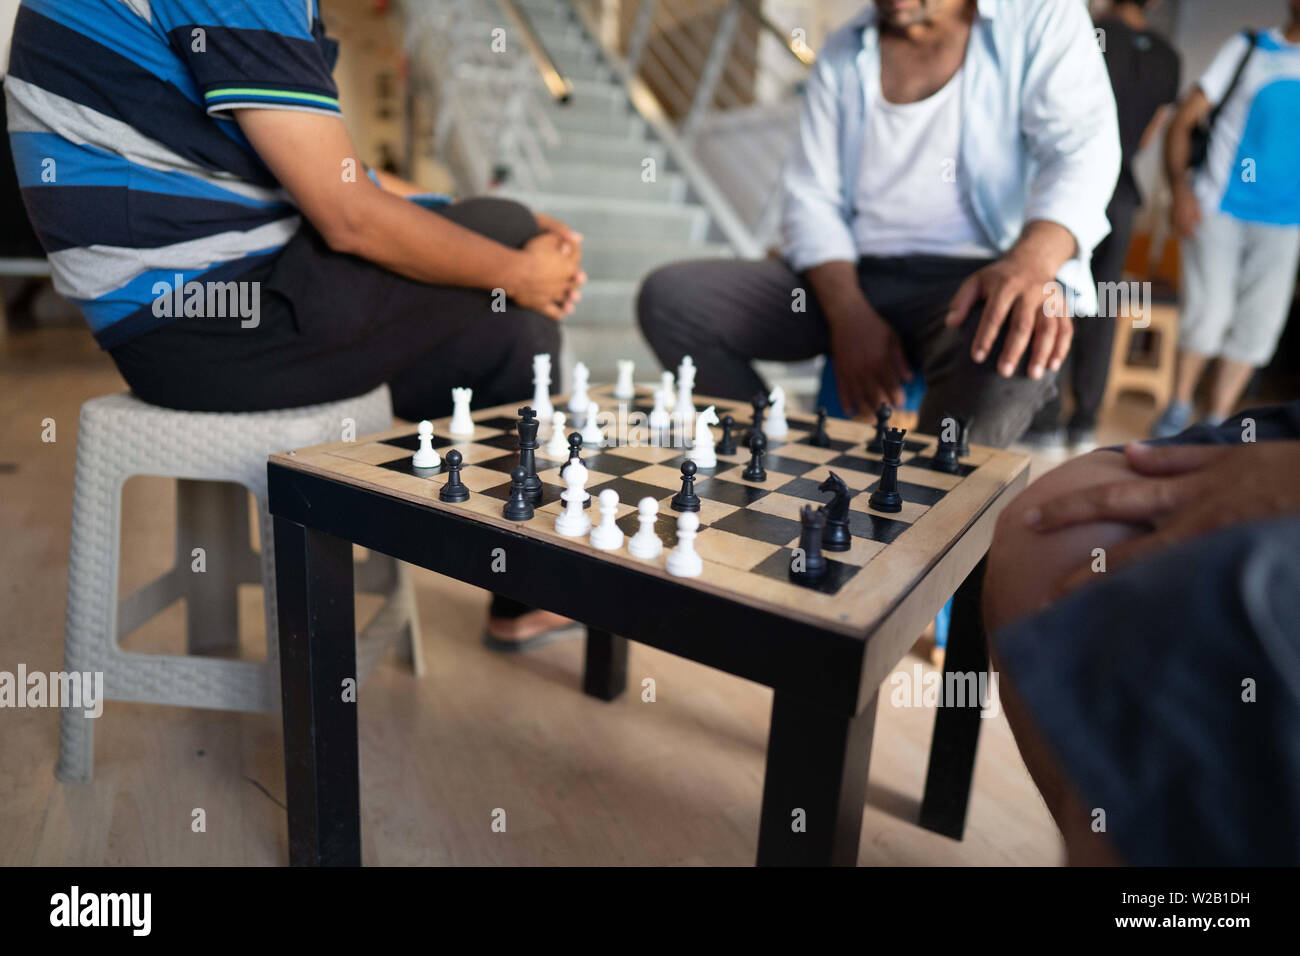 Samos, Samos, Greece. 28th June, 2019. Migrant play chess at a centre for residents on Samos.Samos Island is one of Europe's migrant hotspots acting as a reception and identification centre (RIC). It was established as a temporary accommodation site where migrants could be processed before moving to a refugee camp on the mainland. However, due to the continued number of arrivals, the mainland camps are full and so migrants are being left at the islands. The conditions are inhuman as the Central Government has for several years ignored requests from the municipality for assistance for the i Stock Photo